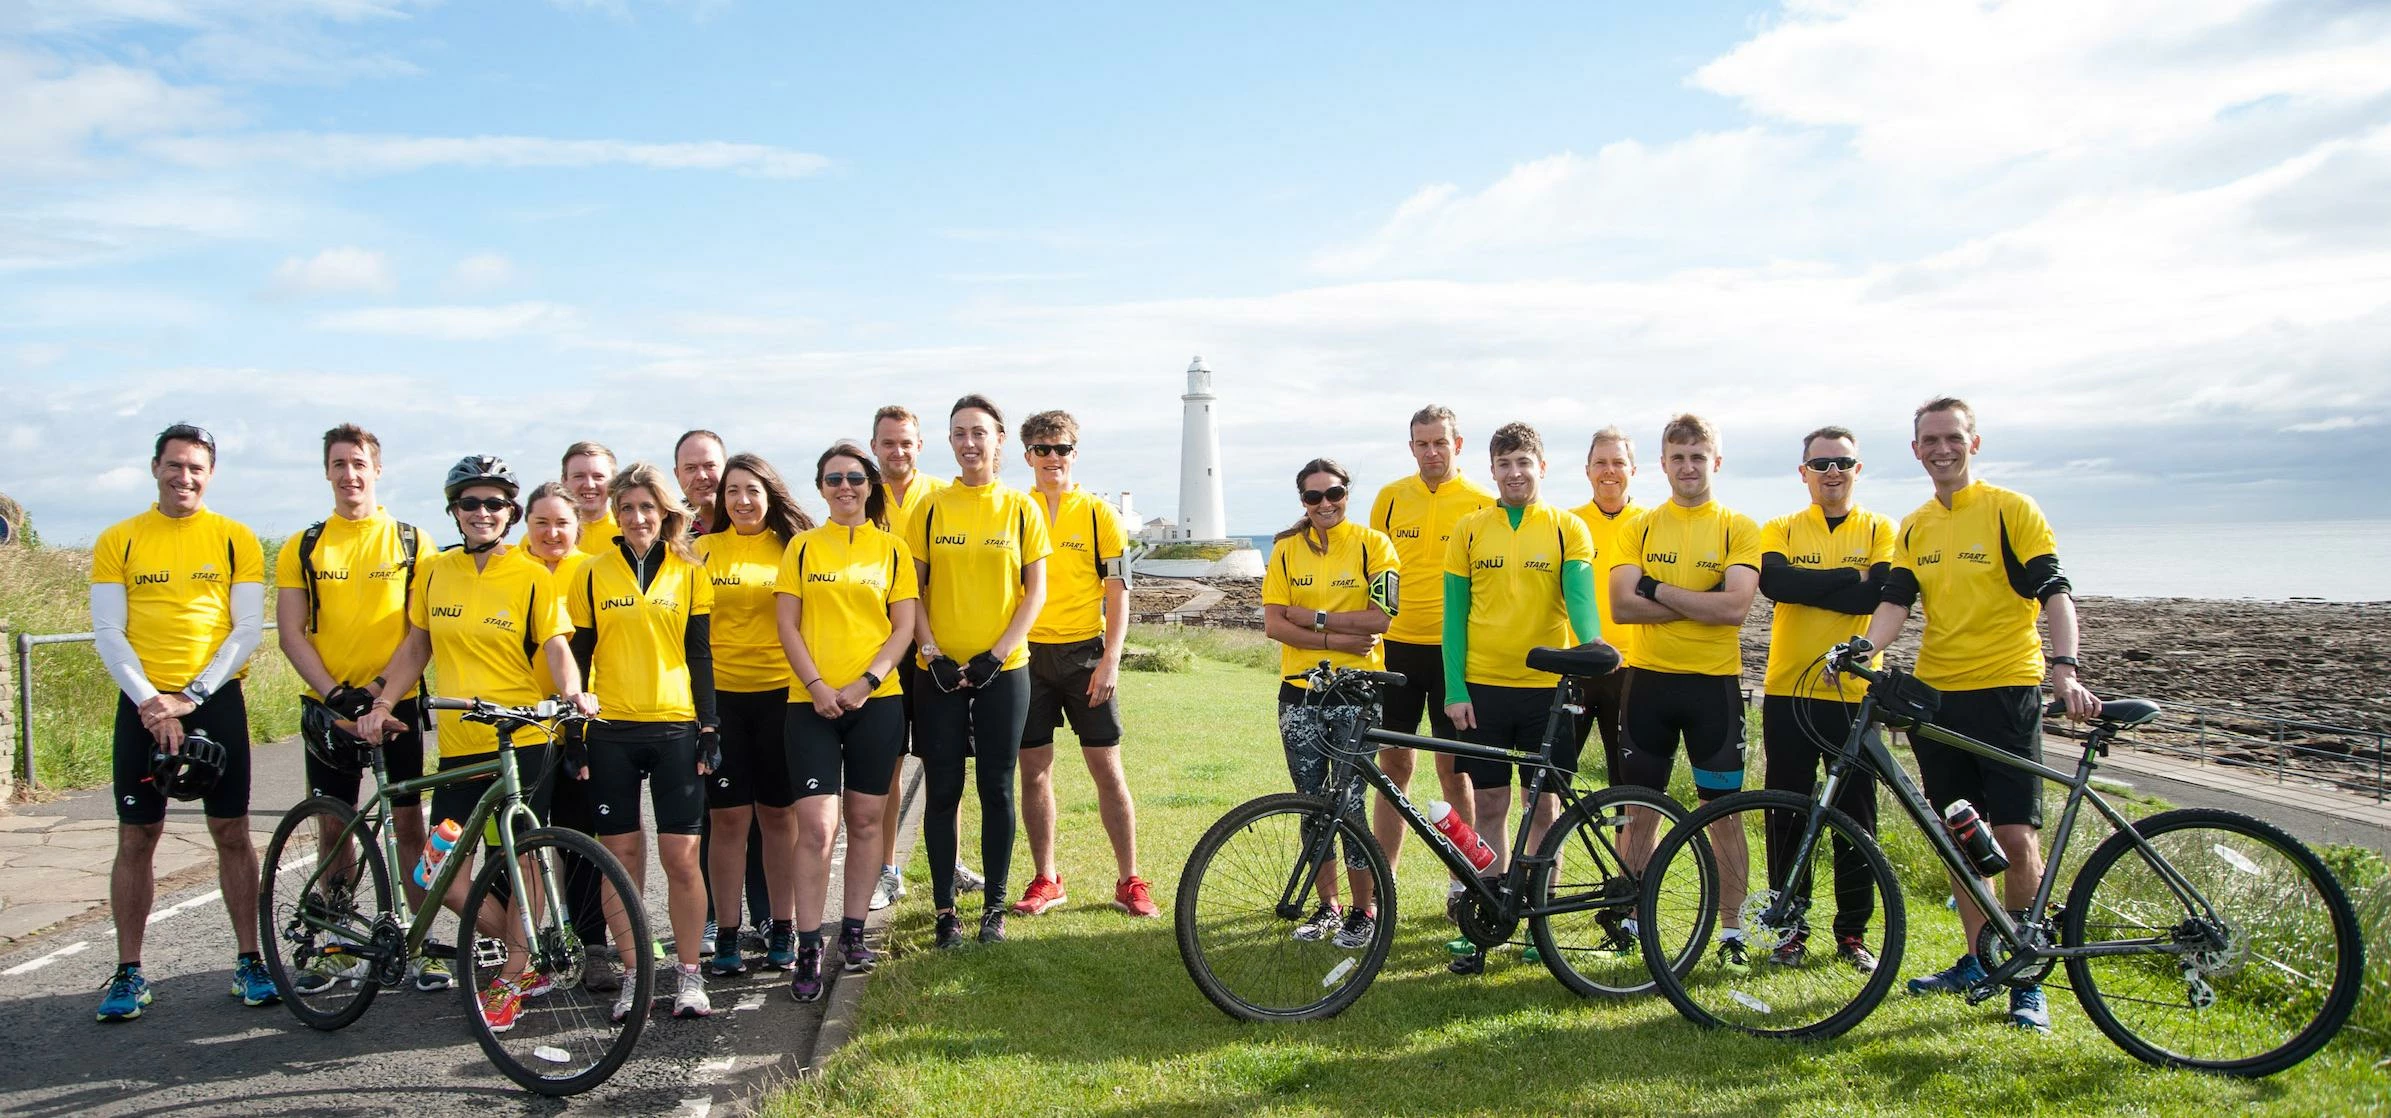 UNW cyclists ready to ride in support of their new nominated charity for 2016